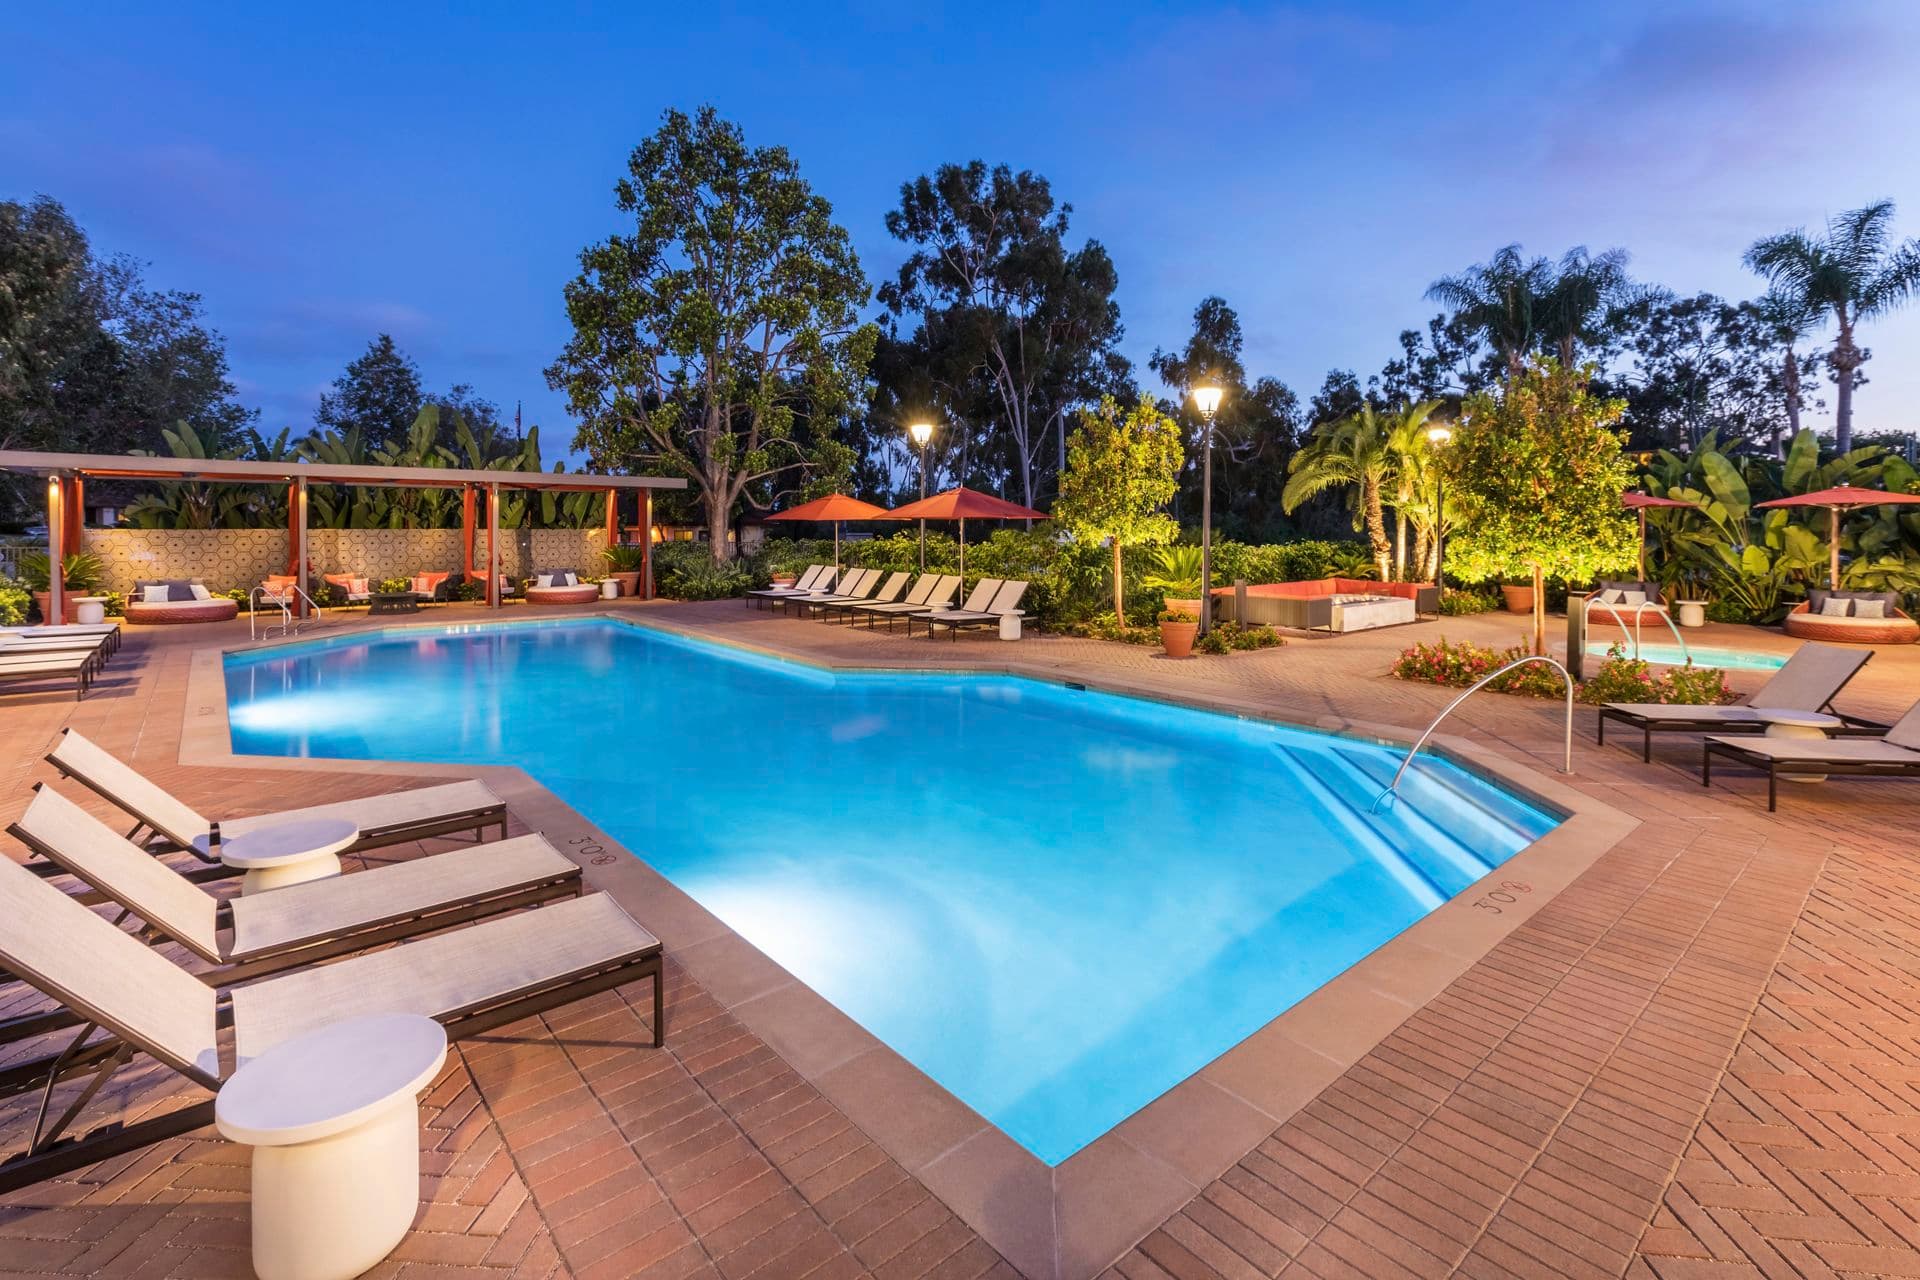 Exterior evening pool view at Seascape Apartment Homes in Carlsbad, CA.